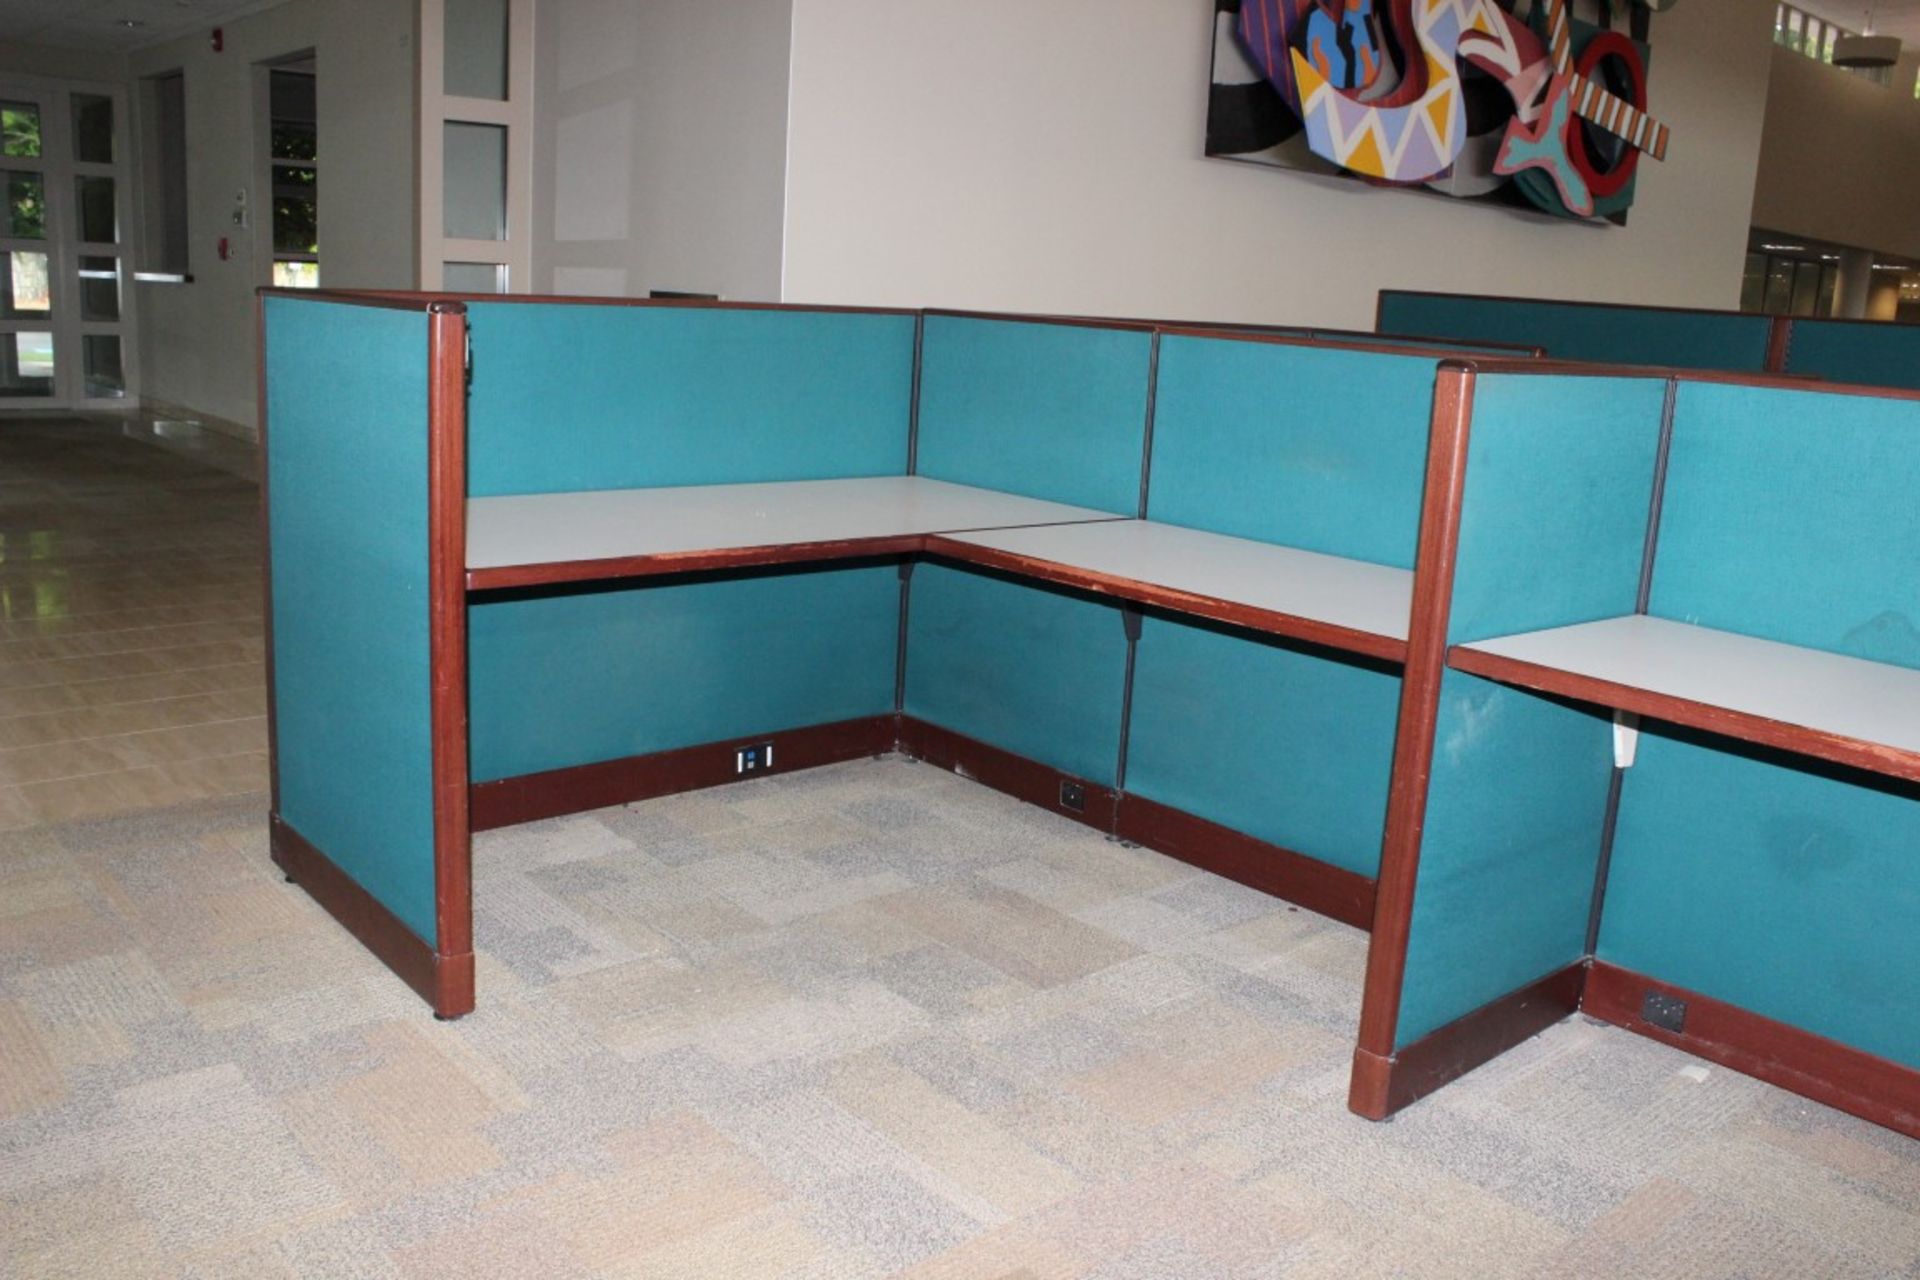 EXECUTIVE OFFICE CUBICLES. DISMANTLED & READY TO LOAD - Image 13 of 15